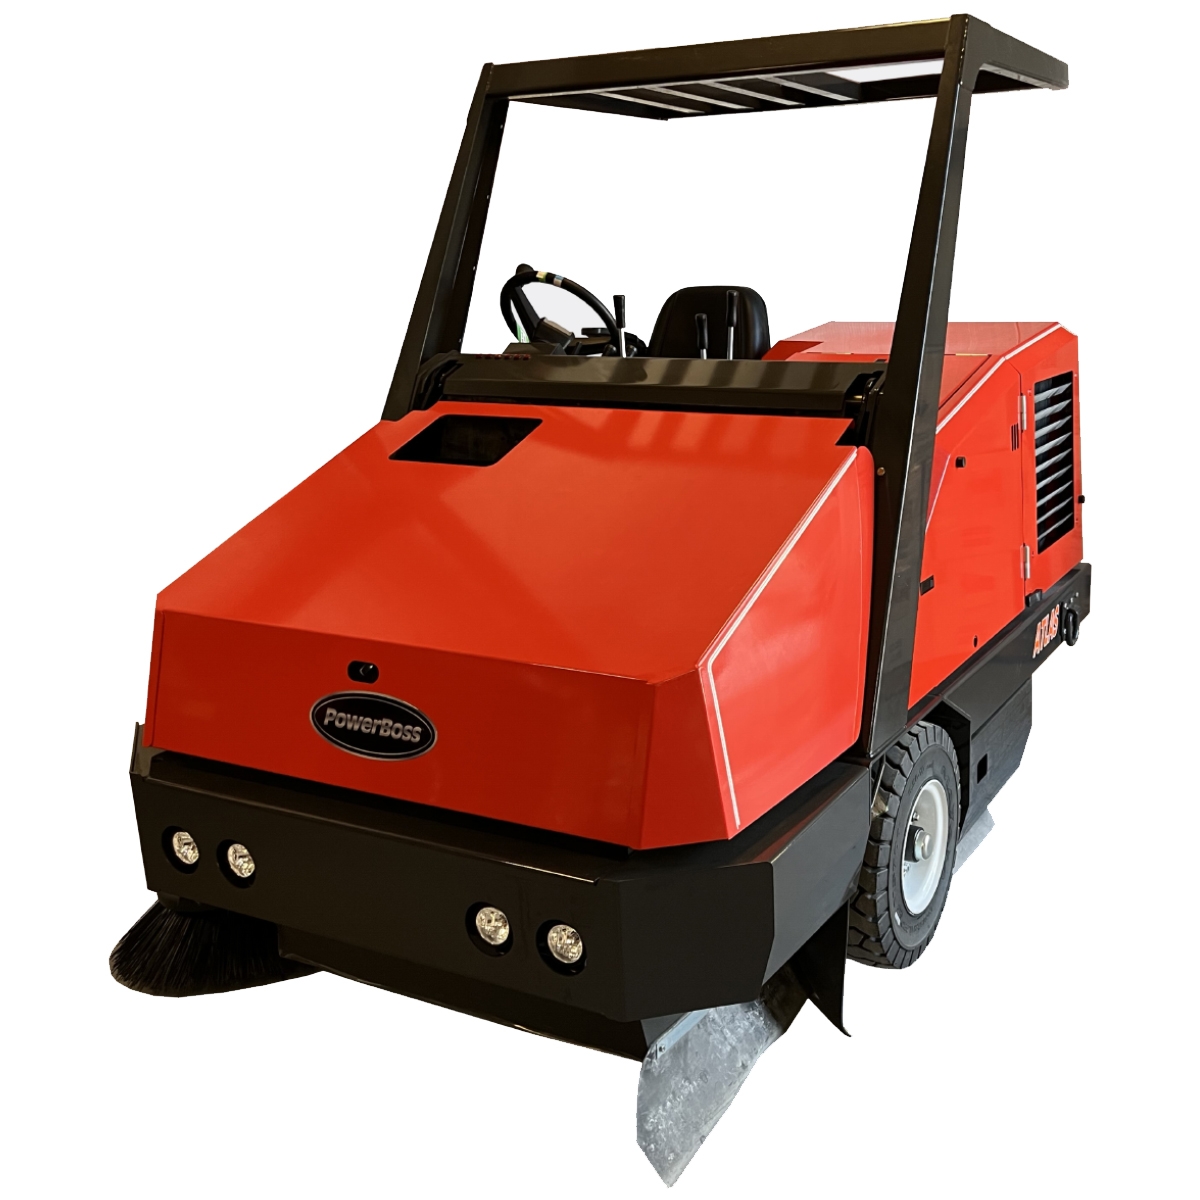 The ATLAS features a massive one-piece, unitized 1/4″ thick steel frame. This rugged style construction provides a longer more durable machine life. The heavy-duty design of the PowerBoss Atlas 64” Sweeper provides a wide cleaning path, increasing the efficiency of your facility cleaning protocols.